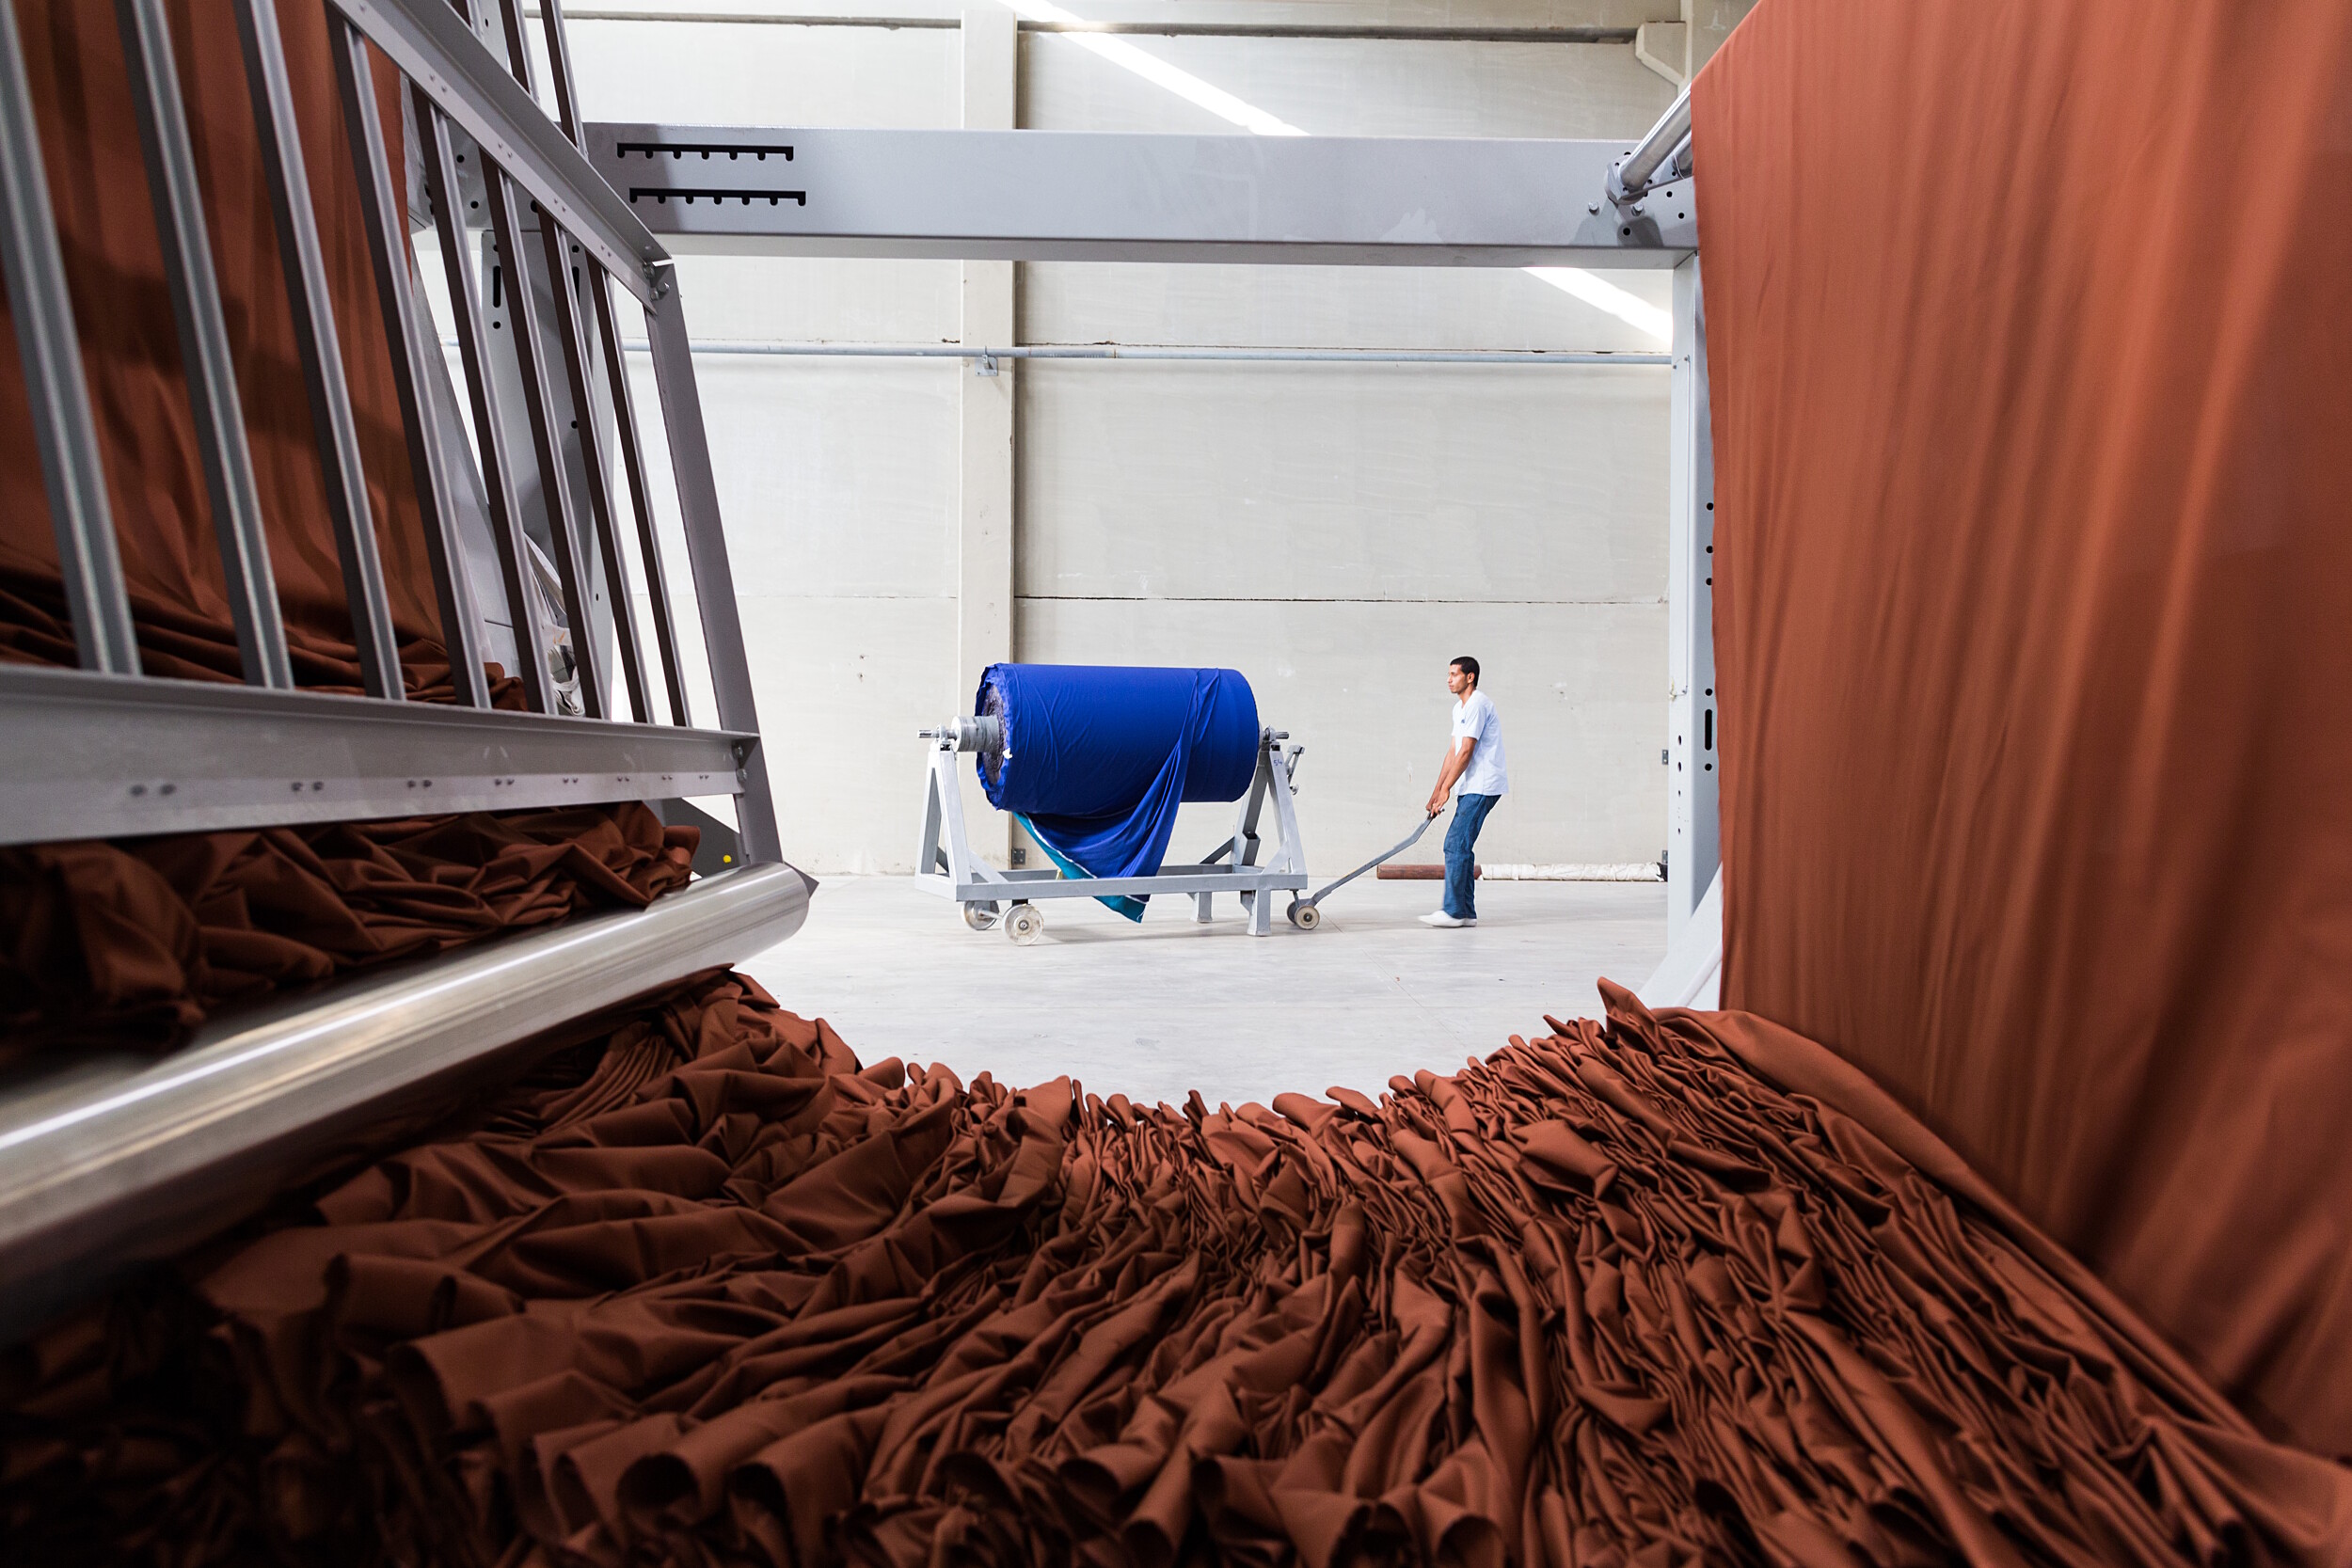 Industrial photography of a textile factory by the manufacturing photographer, David Degner.